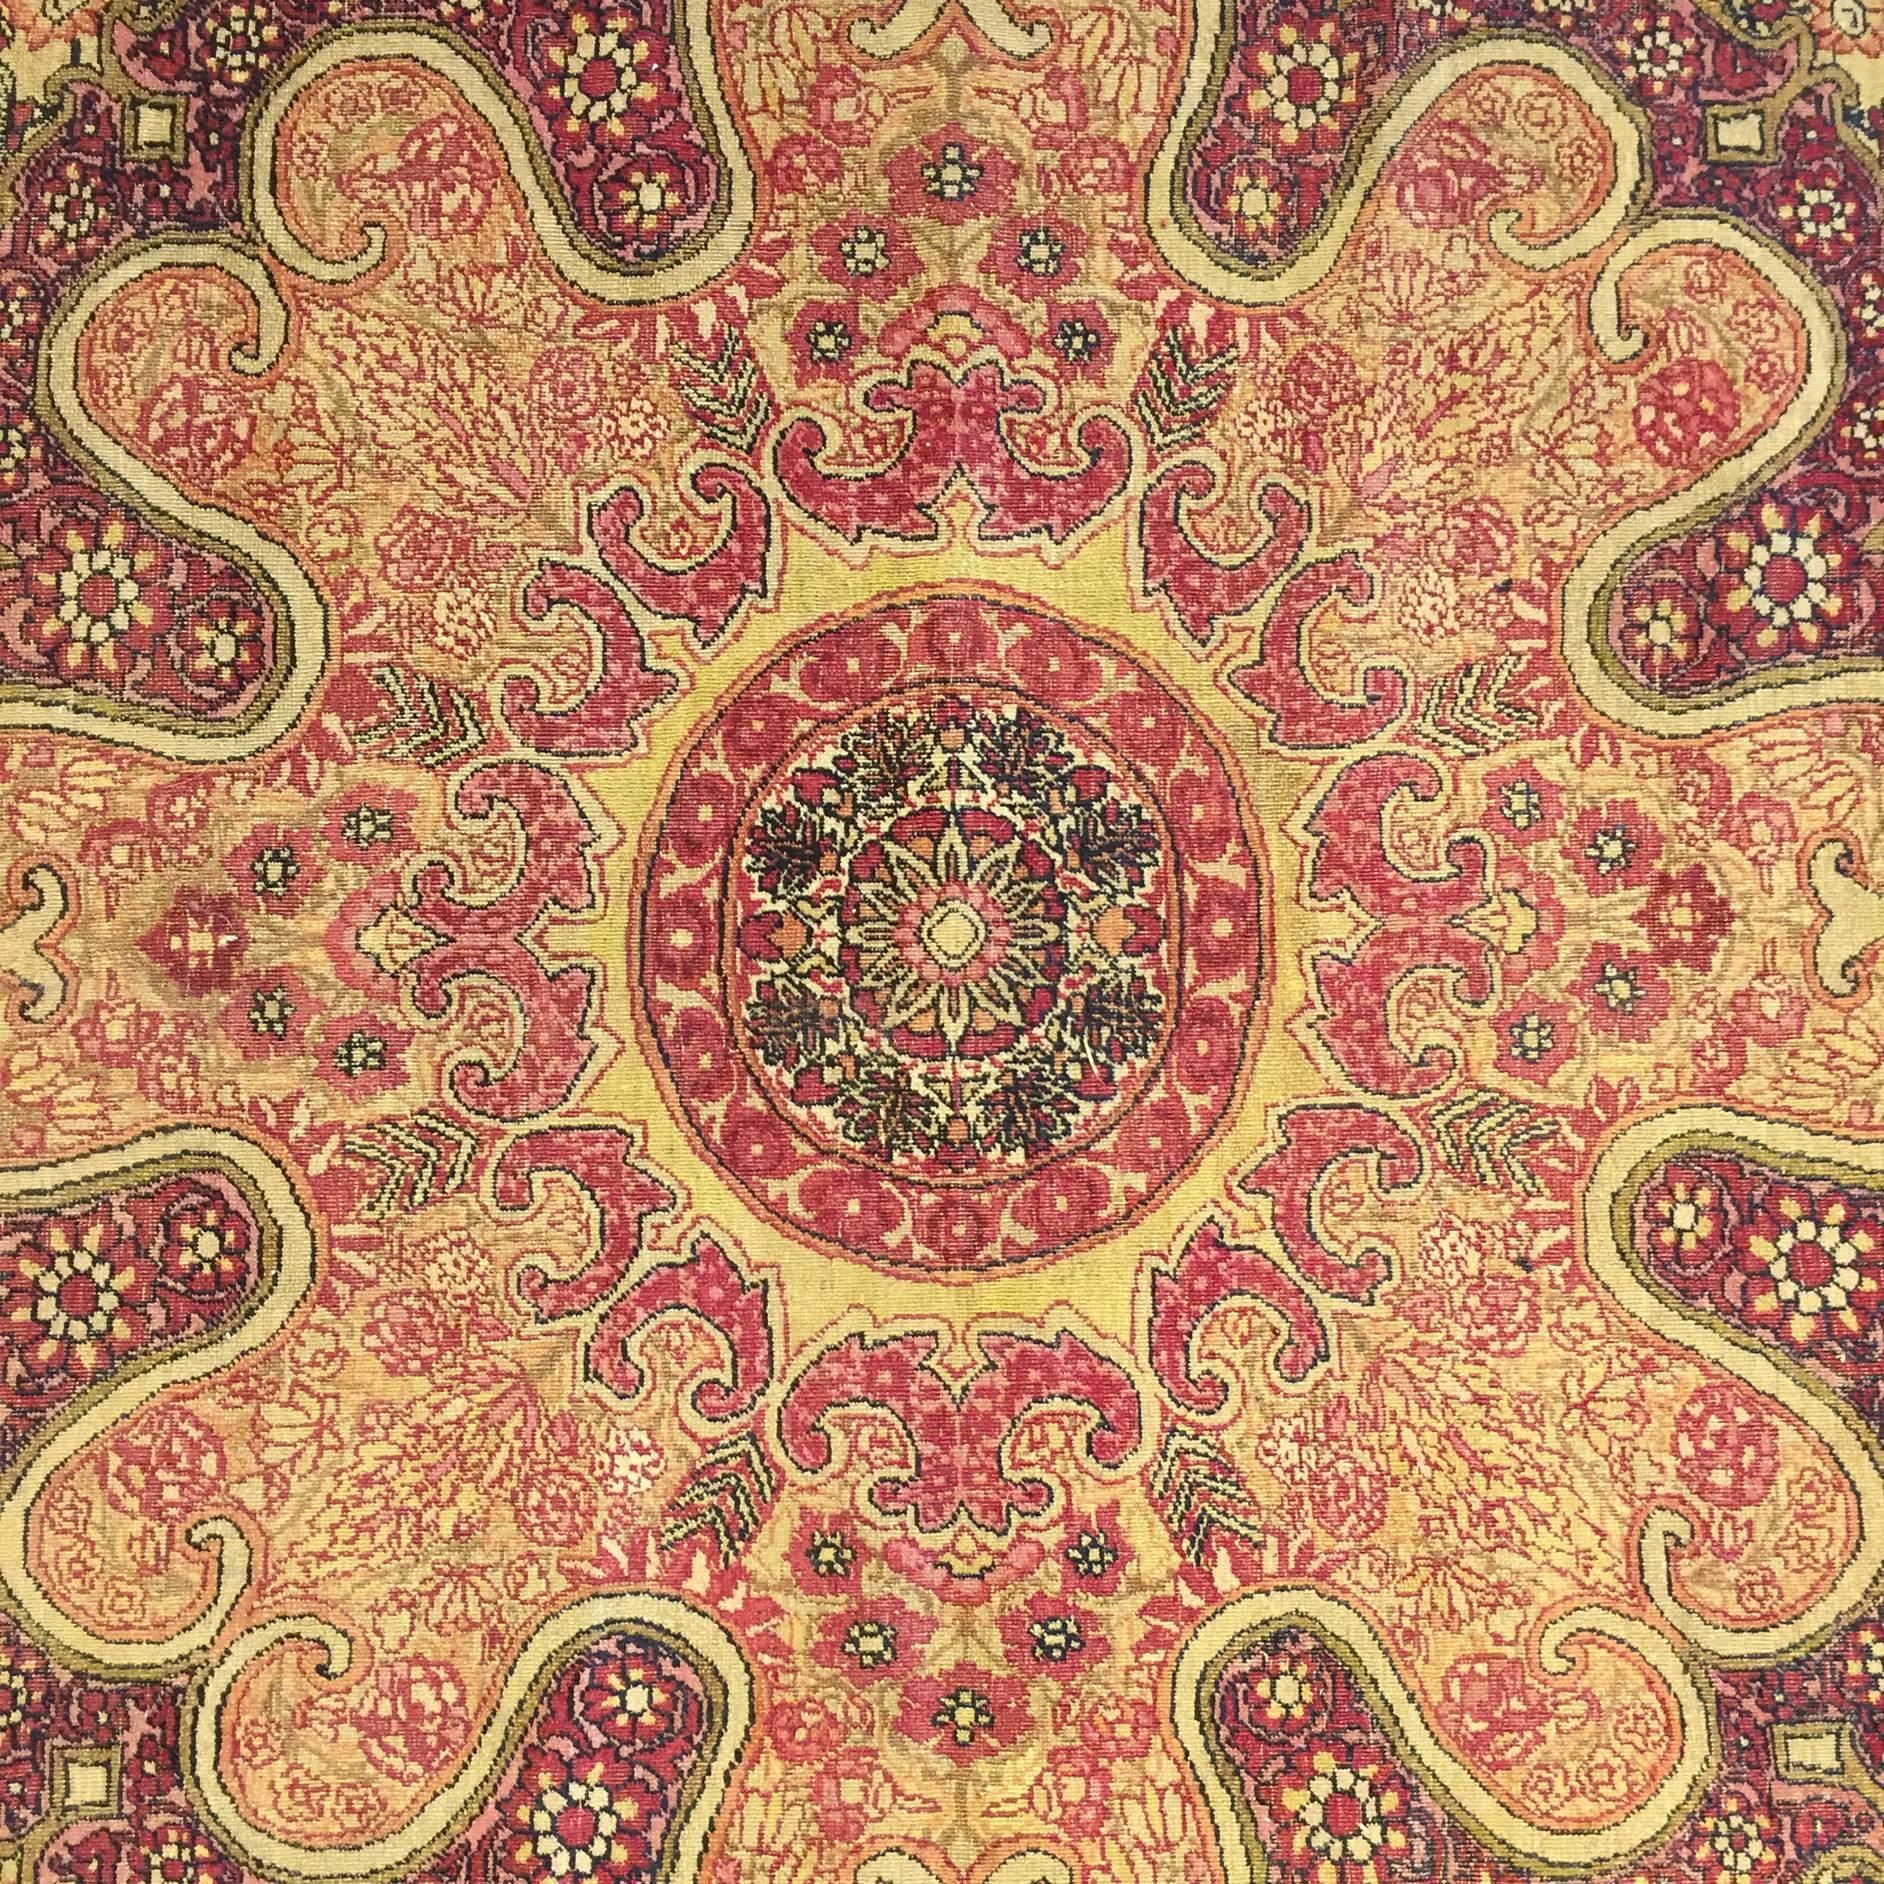 An amazing late 19th century Persian Lavar Kirman rug with a beautiful central medallion amidst an intensely woven field of flowers, surrounded by multiple complementary floral borders.